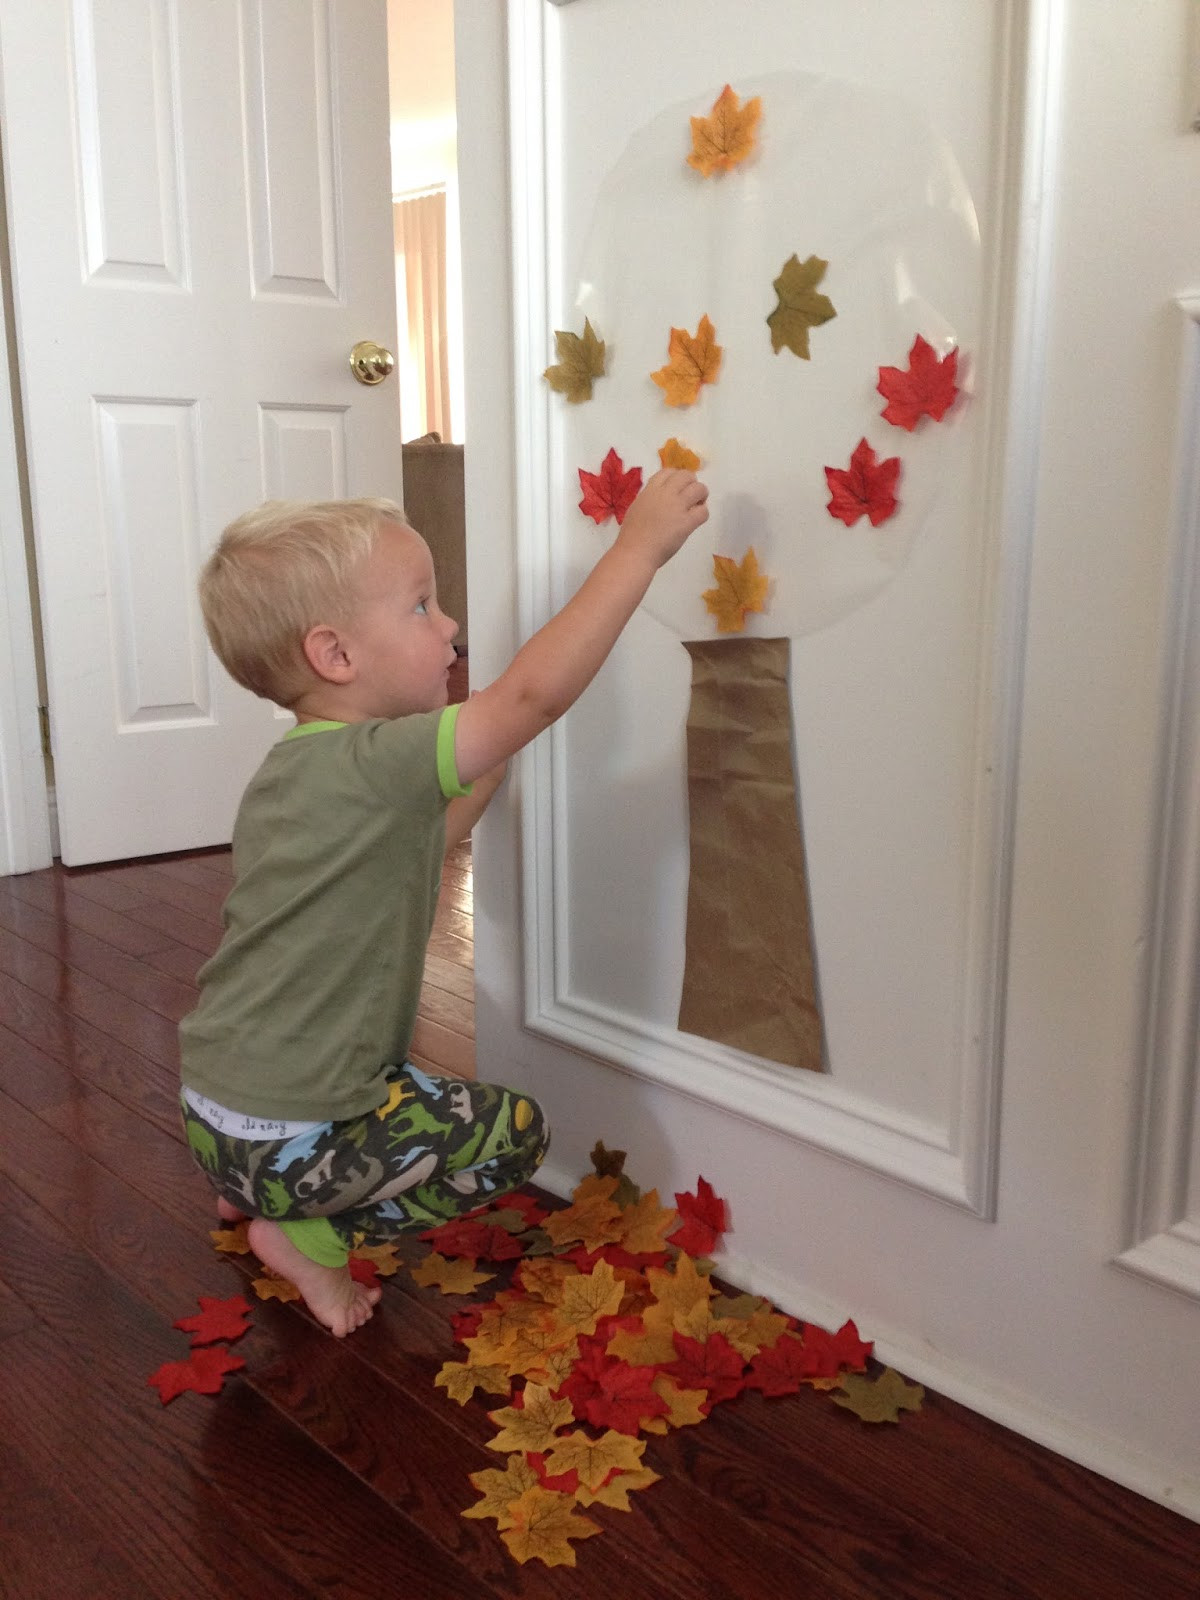 Autumn Activities For Toddlers
 Toddler Approved Easy Fall Tree Activity for Toddlers